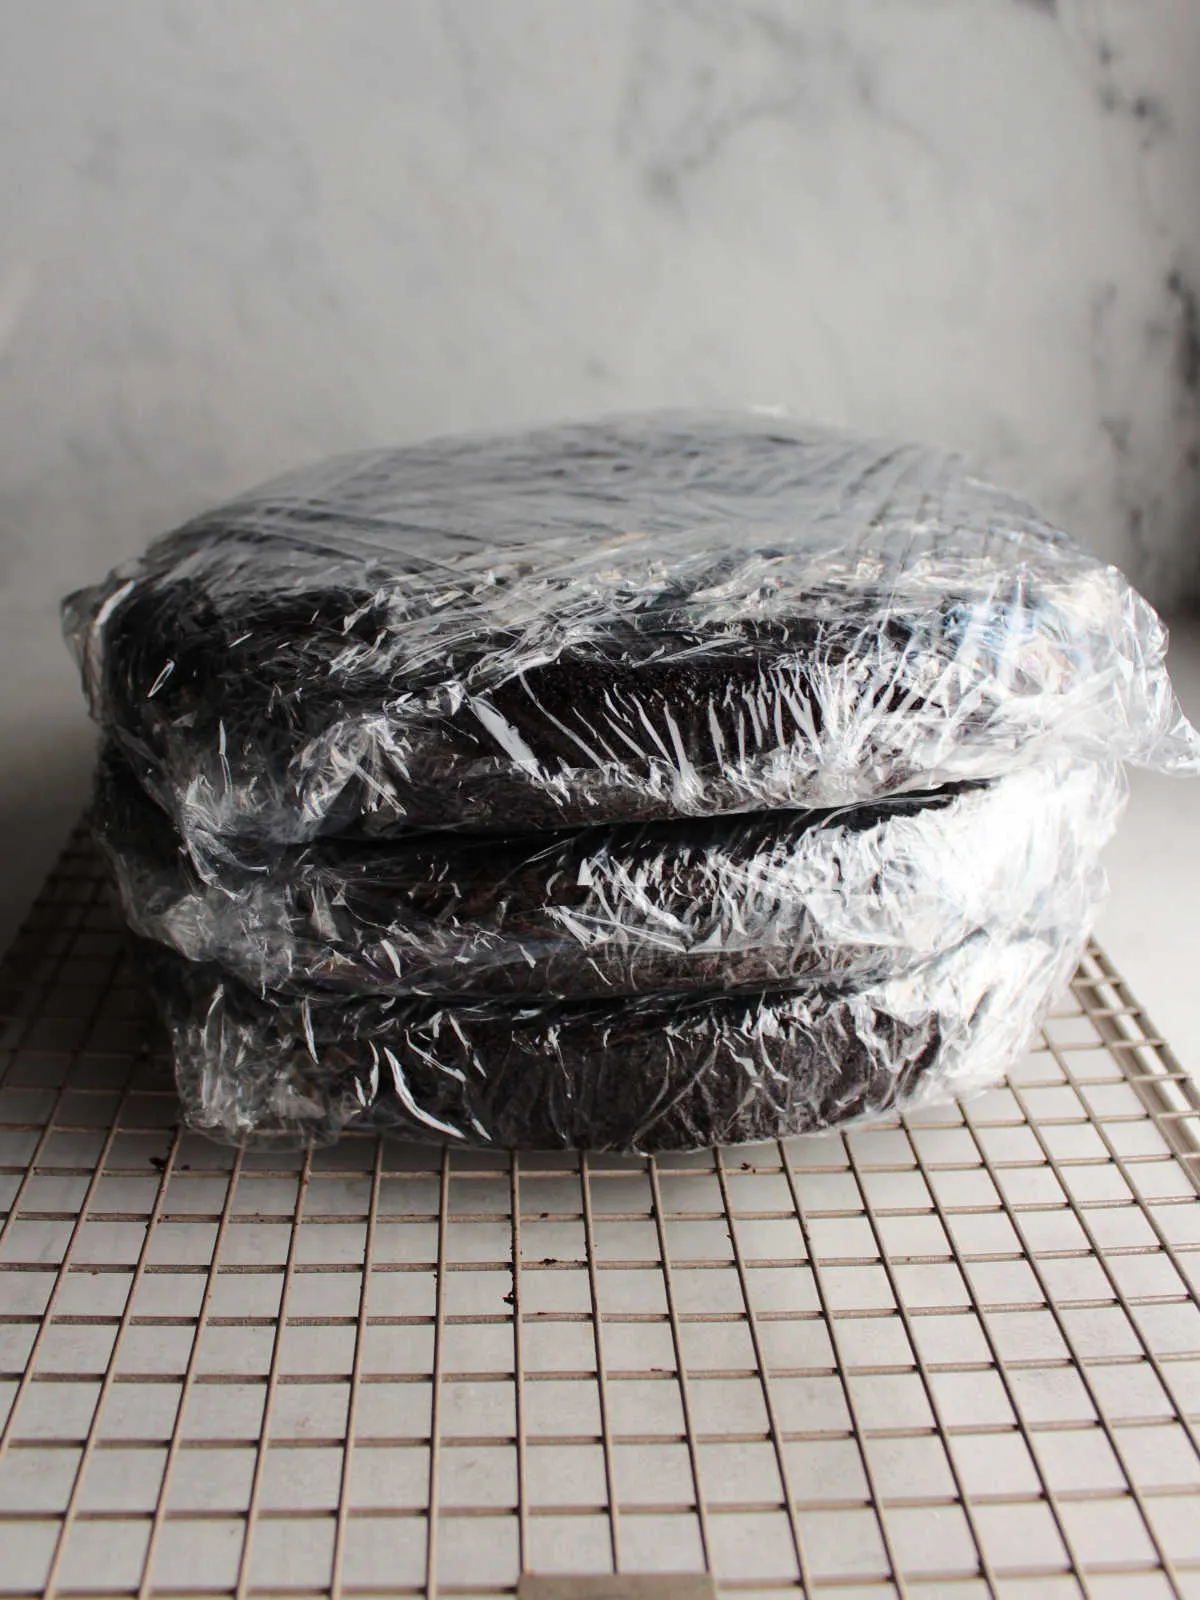 Three chocolate cake layers wrapped in plastic wrap, ready to go in the freezer.